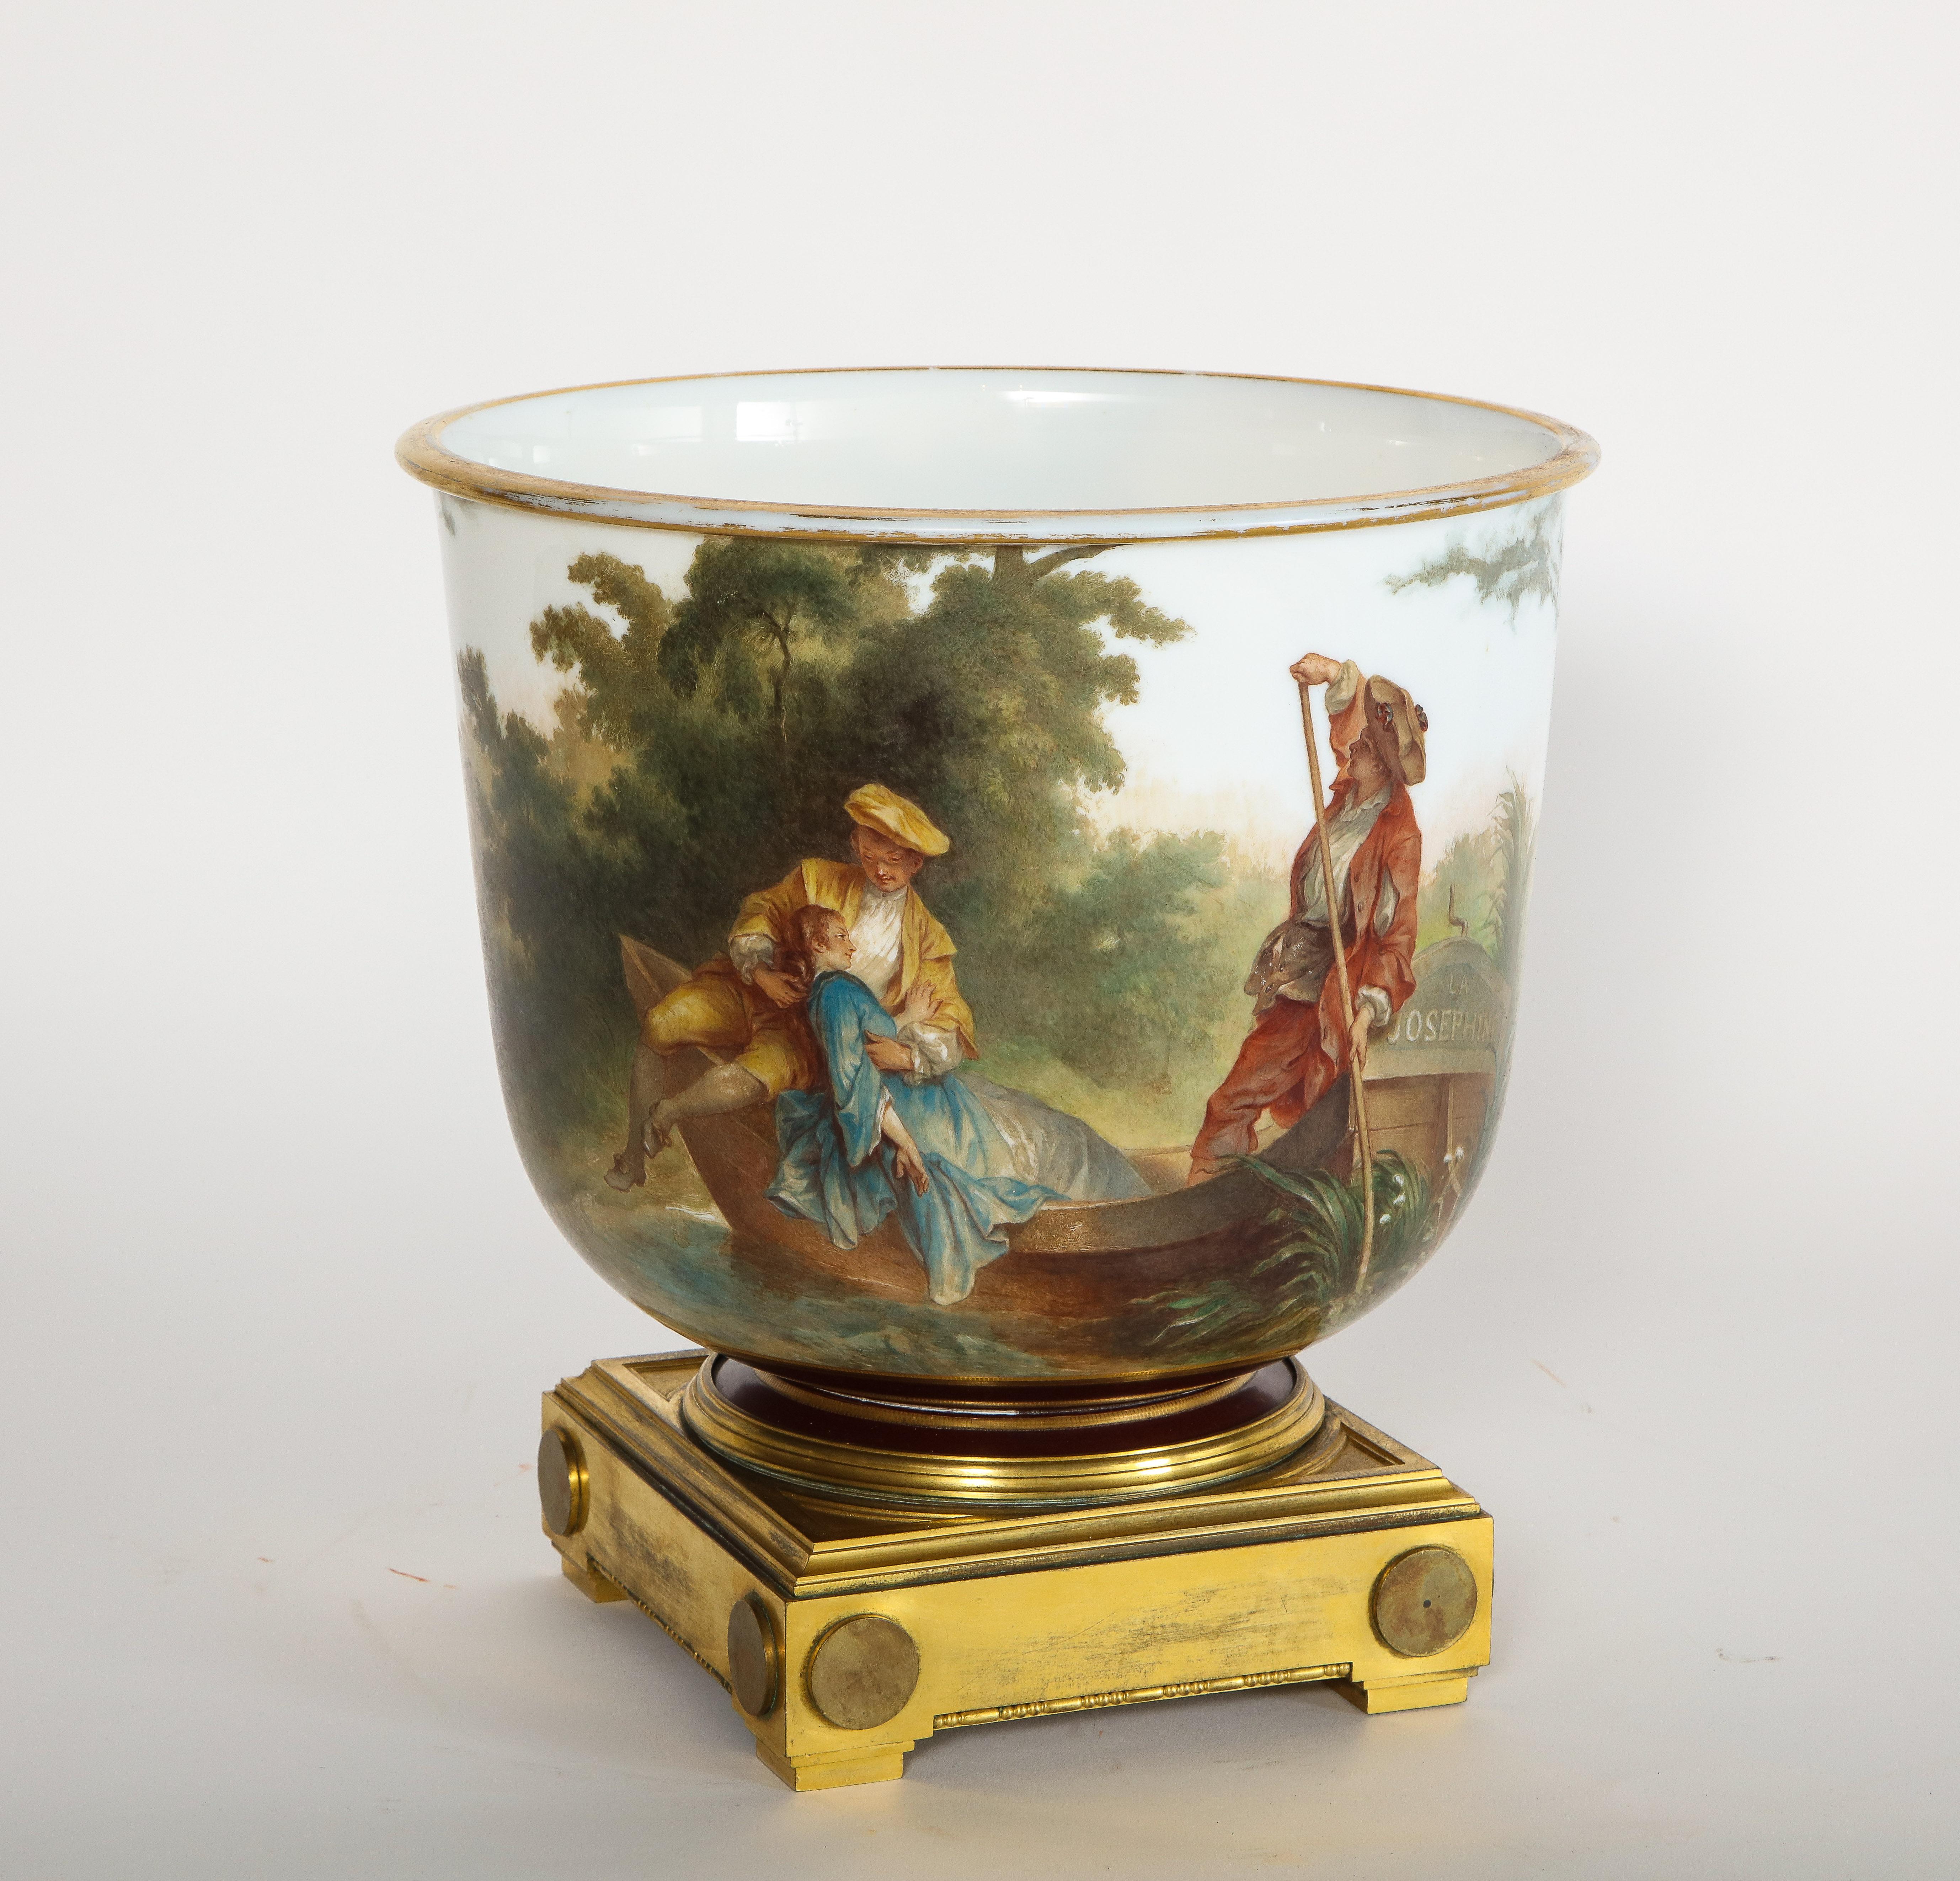 A fabulous, quite important and large signed Baccarat white opaline crystal hand painted centerpiece/jardiniere/planter with Watteau/Neoclassical landscape and river scene. This extraordinary piece is artfully crafted by the best crystal